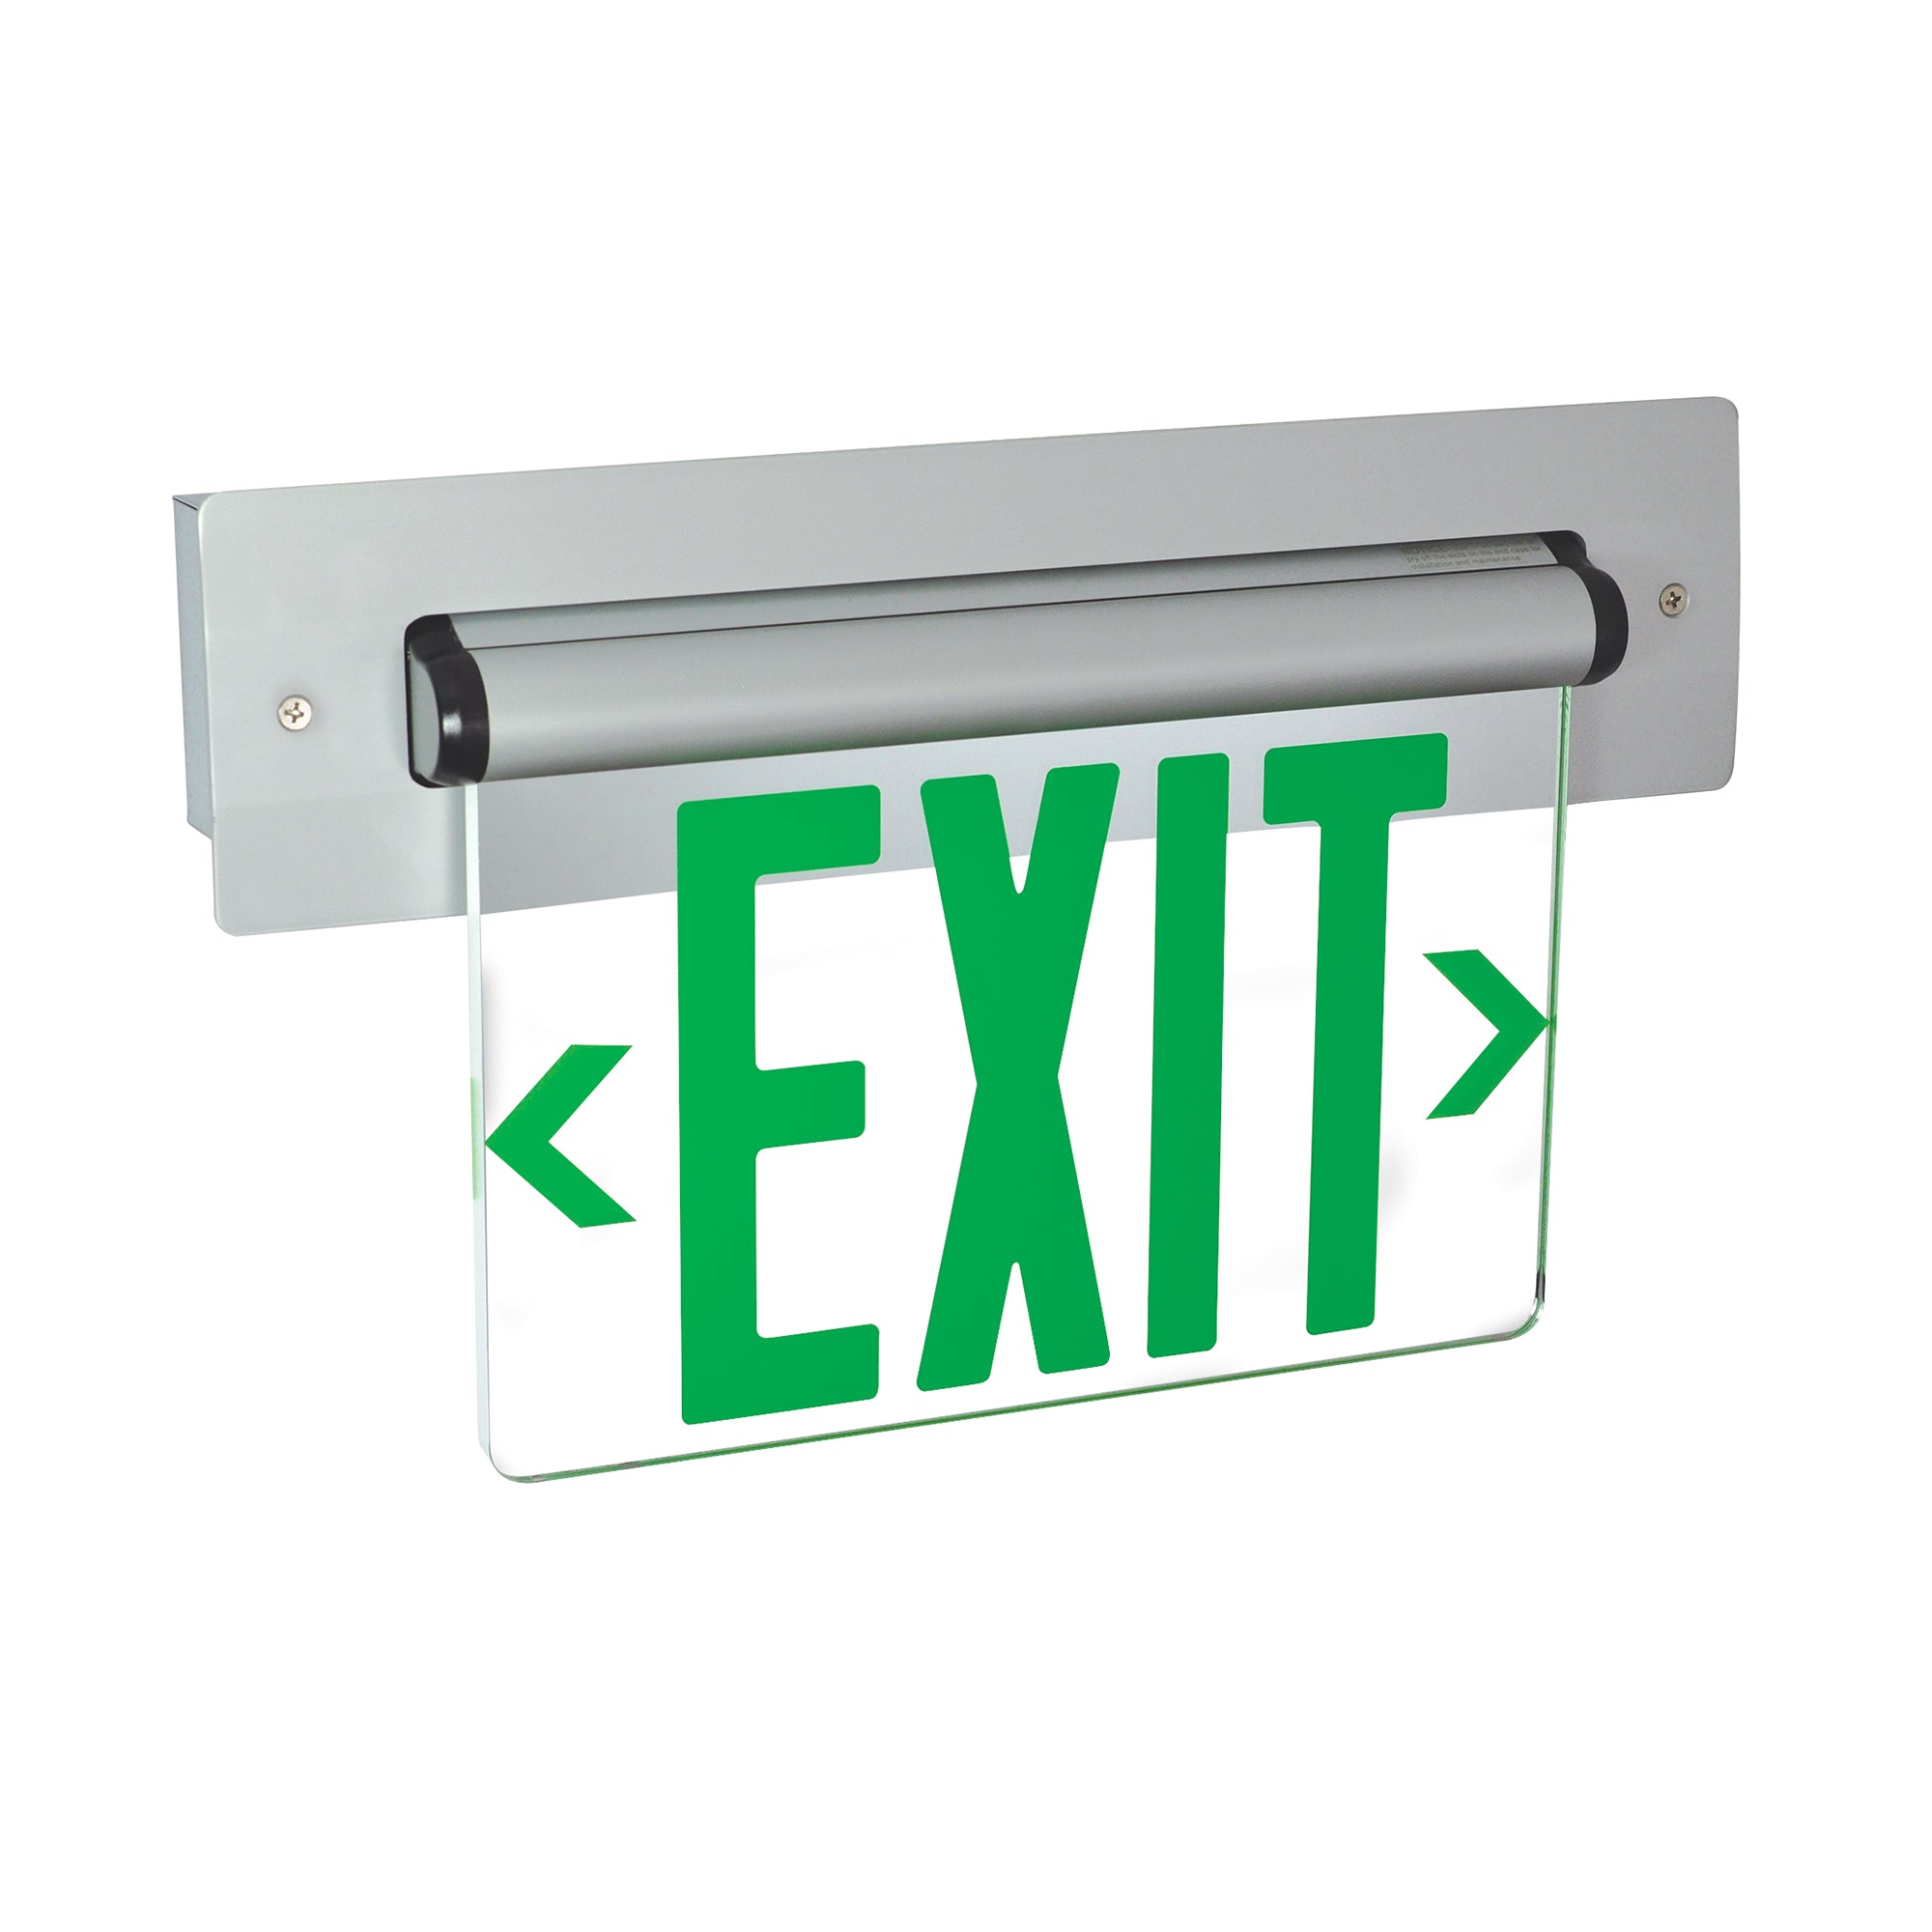 Nora Lighting NX-813-LEDGCA - Exit / Emergency - Recessed Adjustable LED Edge-Lit Exit Sign, AC Only, 6 Inch Green Letters, Single Face / Clear Acrylic, Aluminum Housing